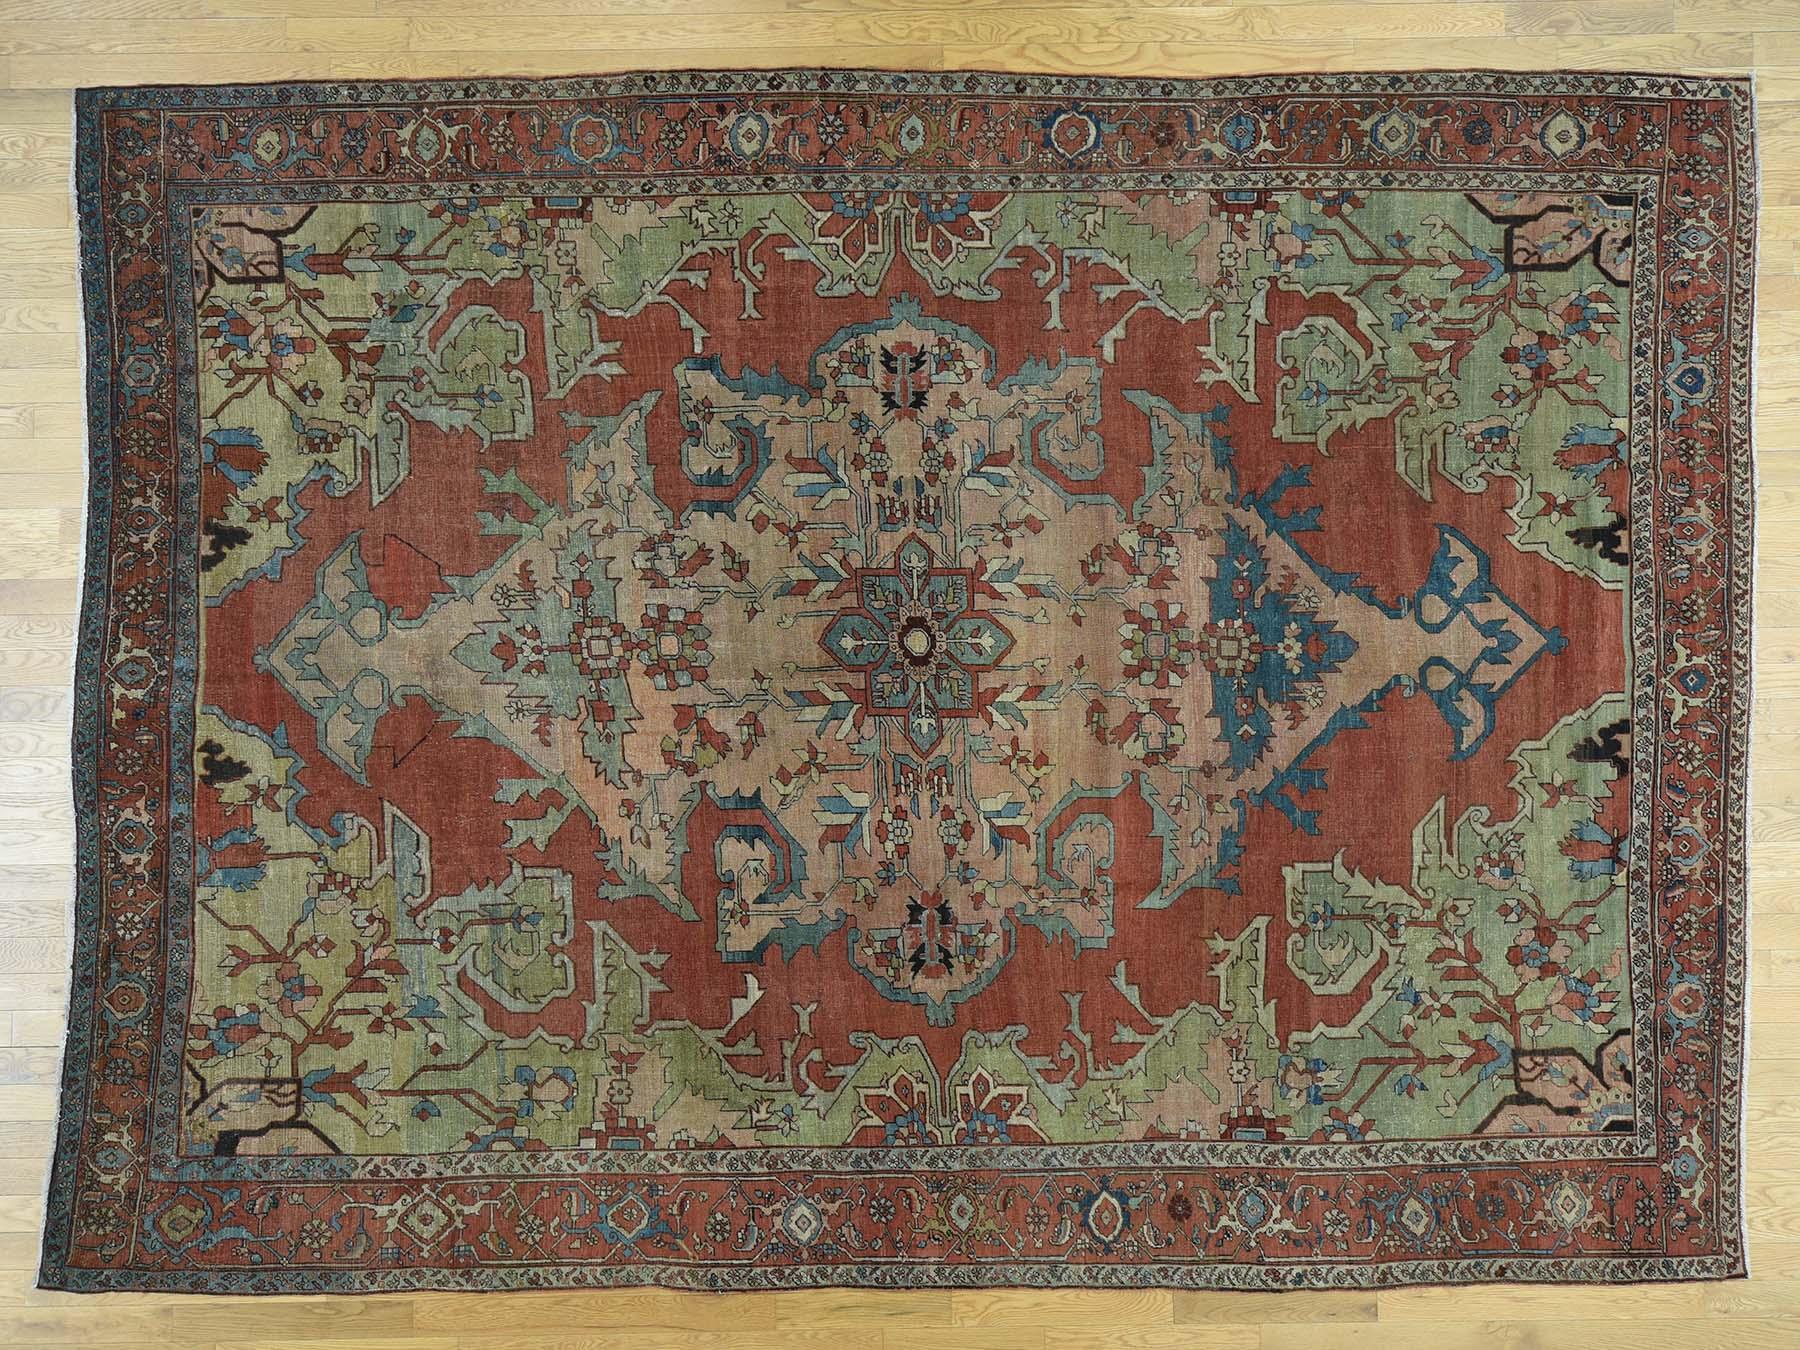 This is a genuine hand knotted Oriental rug. It is not hand tufted or machine made rug. Our entire inventory is made of either hand knotted or handwoven Rugs.

Bring life to your home with this admirable antique carpet. This handcrafted Persian